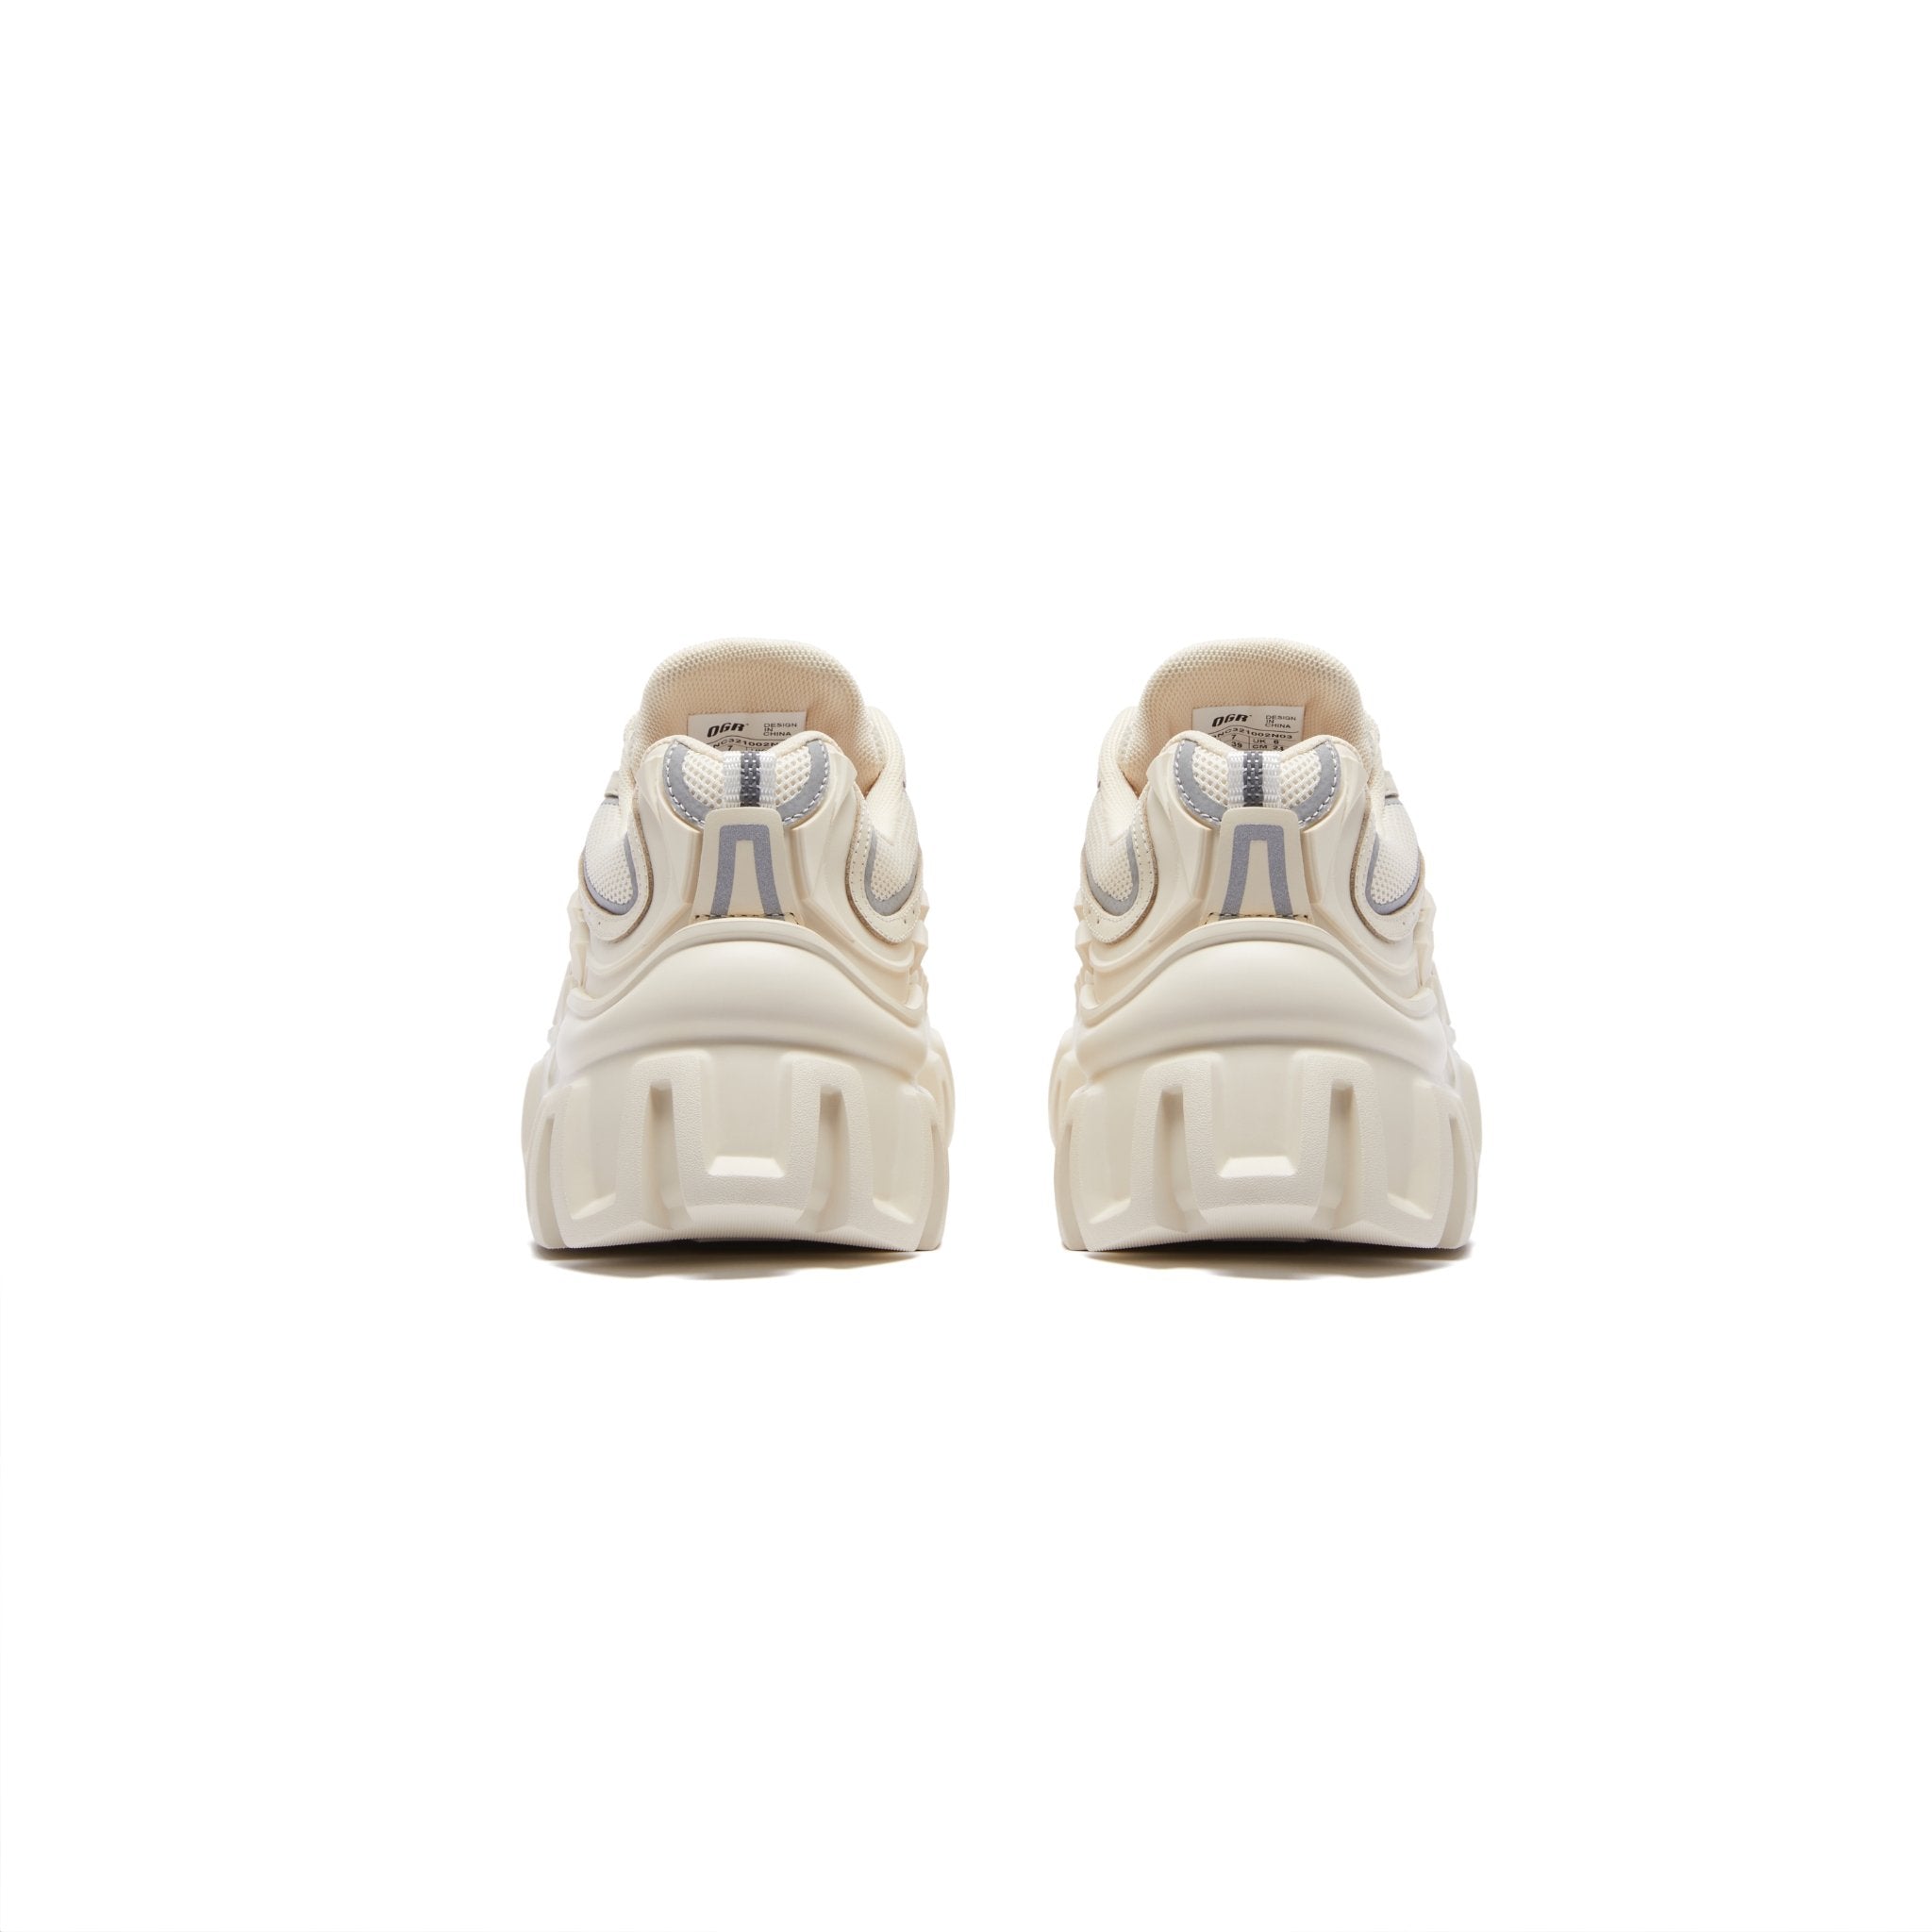 OGR MECHA Heavy Collection Shoes Beige | MADA IN CHINA